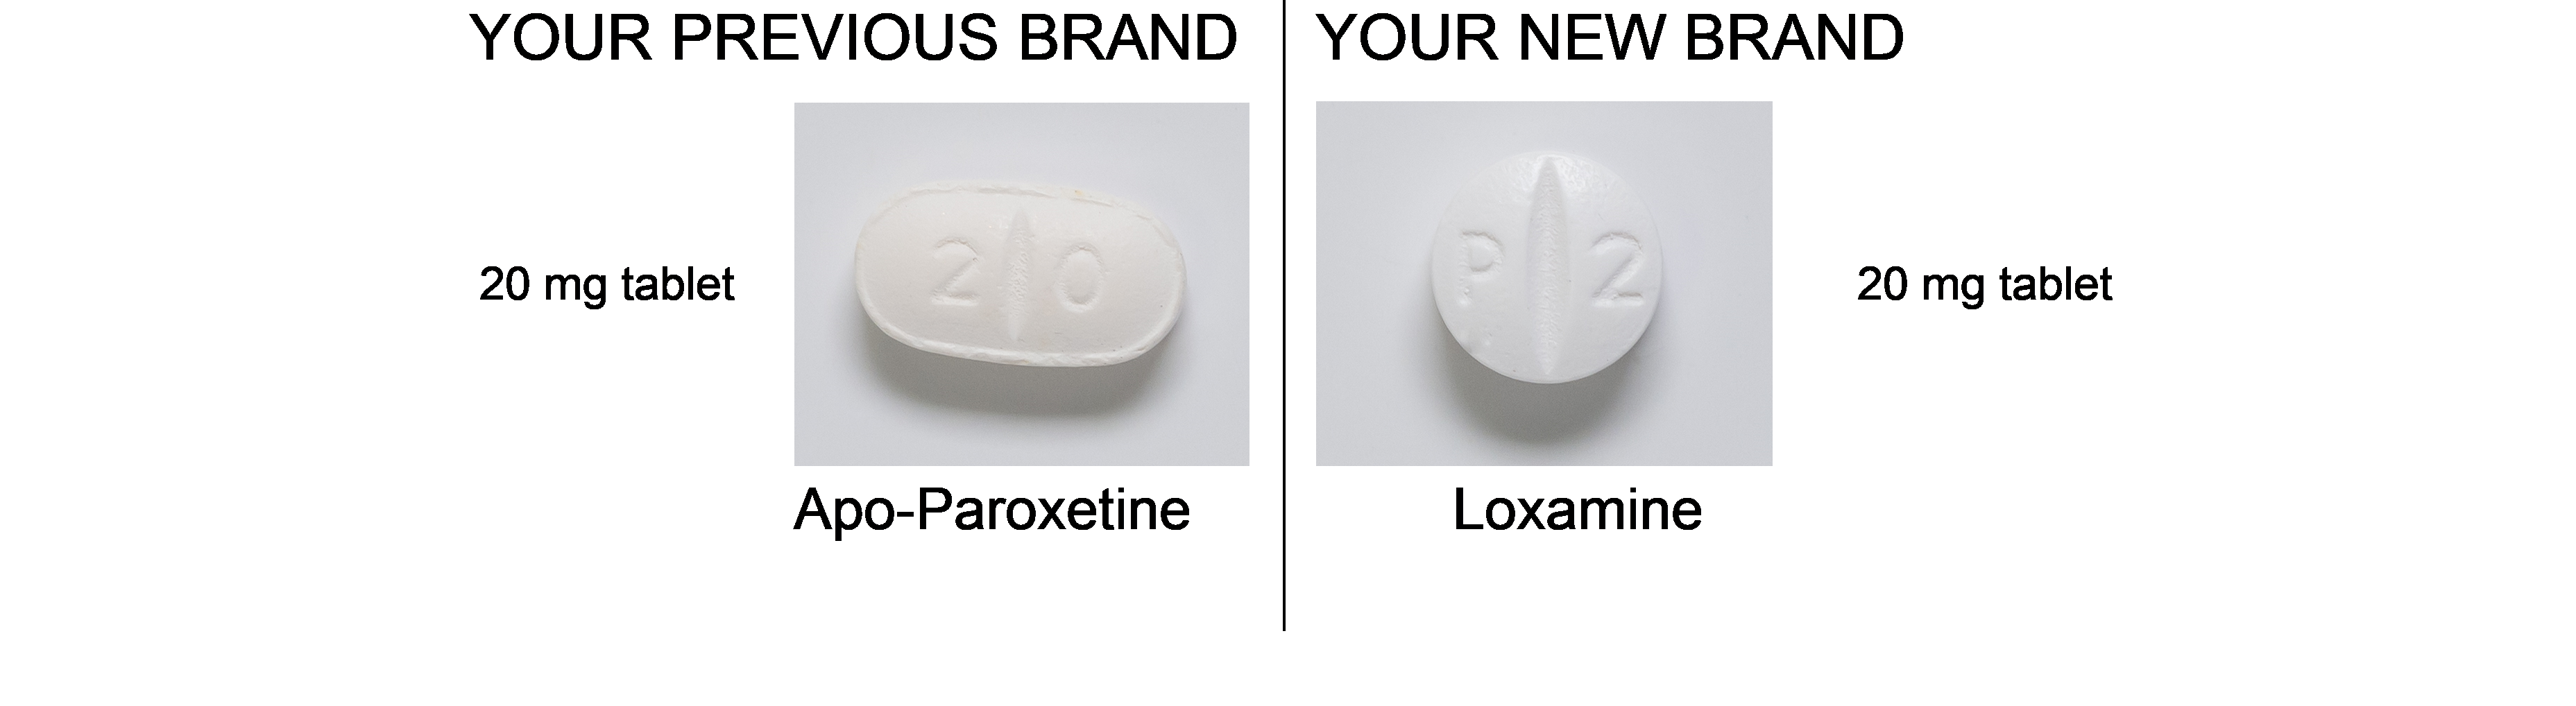 Image shows that Apo-Paroxetine tablets are ovoid and the Loxamine is round.